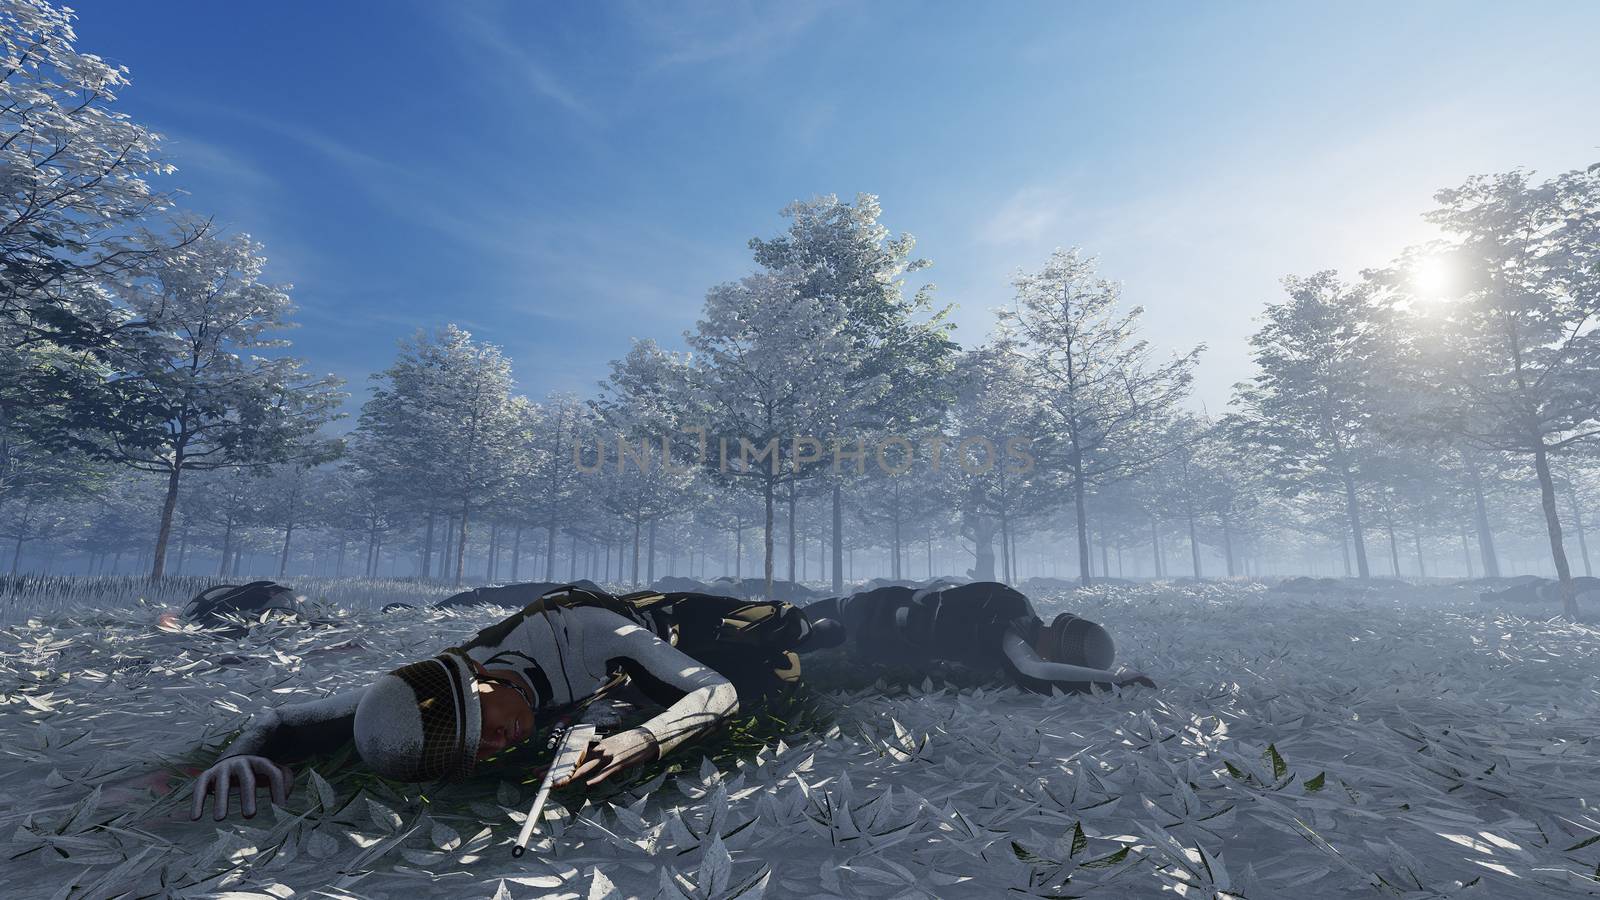 Dead soldiers laying in blood pools scattered over snow covered forest